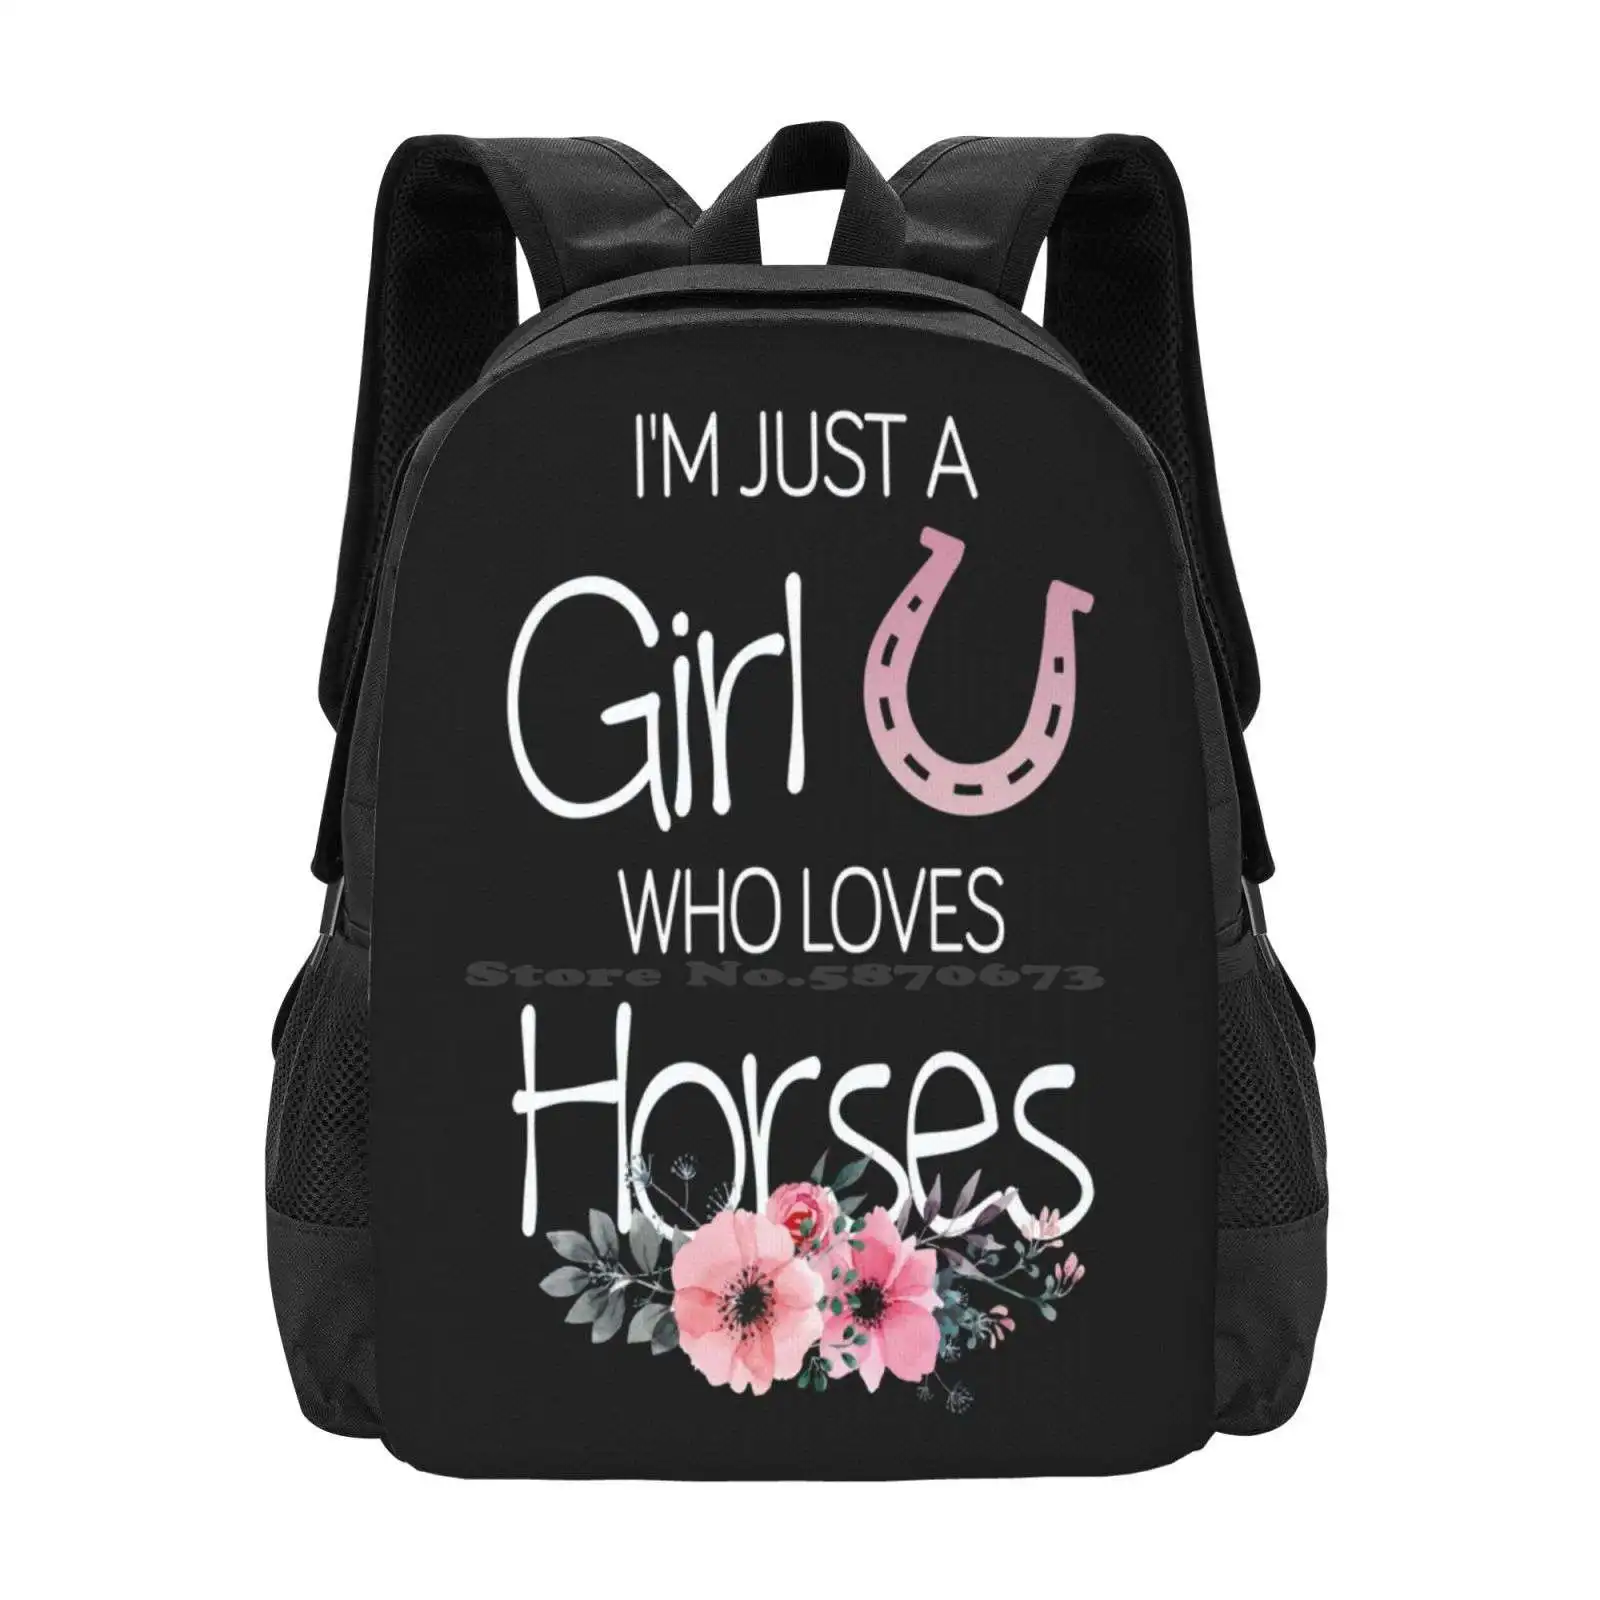 

I'M Just A Girl Who Loves Horses Pattern Design Laptop Travel School Bags Horses For Sale Equestrian Horseback Riding Horse